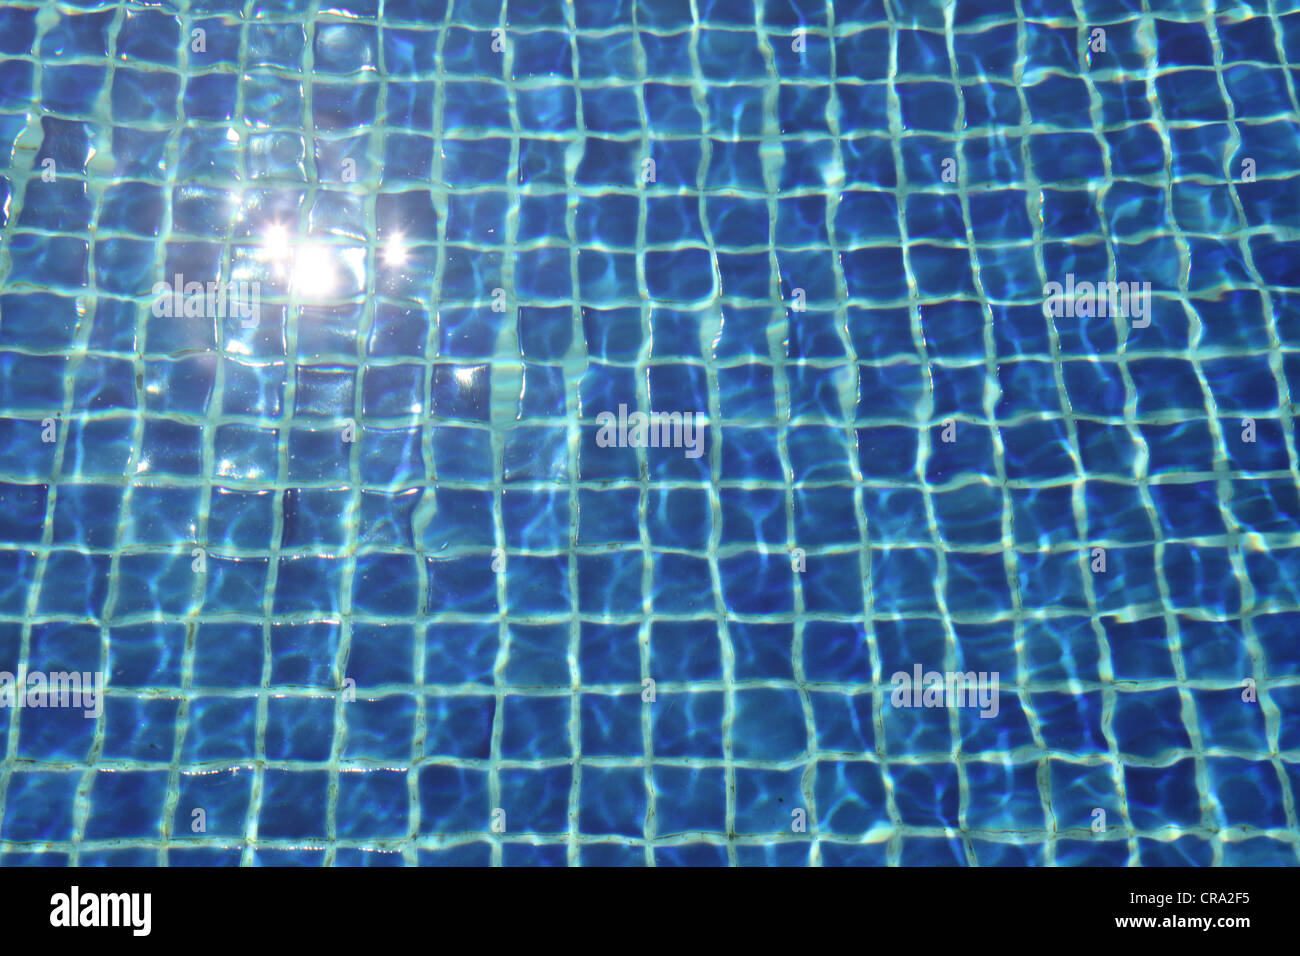 It's a photo of the water of a swimming pool with the blue tiles at the bottom of the pool. It's sunny and fresh visuals. day Stock Photo